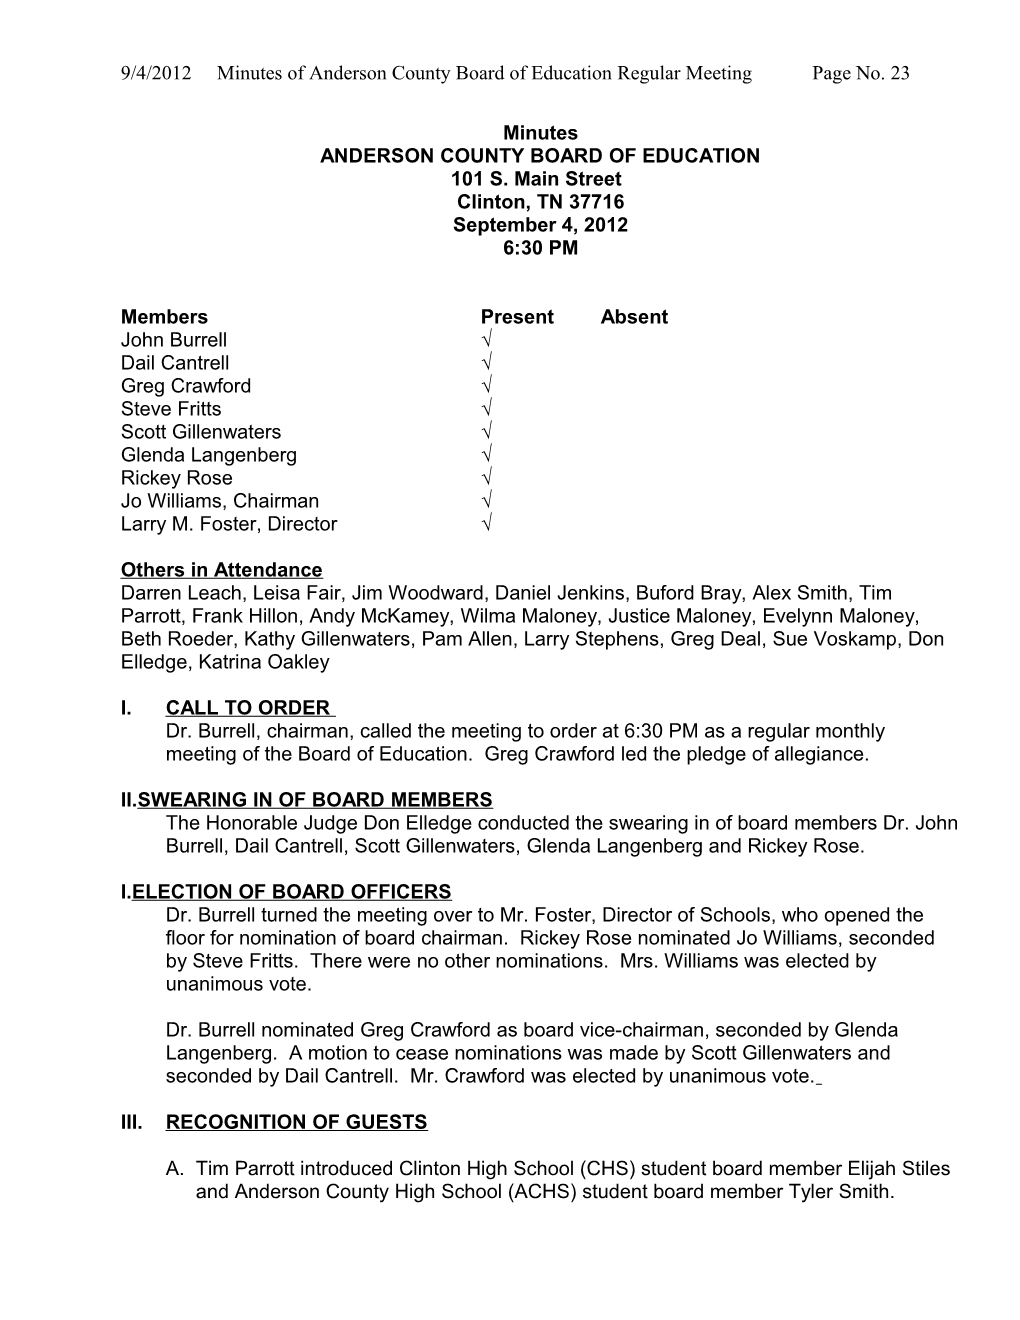 9/4/2012 Minutes of Anderson County Board of Education Regular Meeting Page No. 1